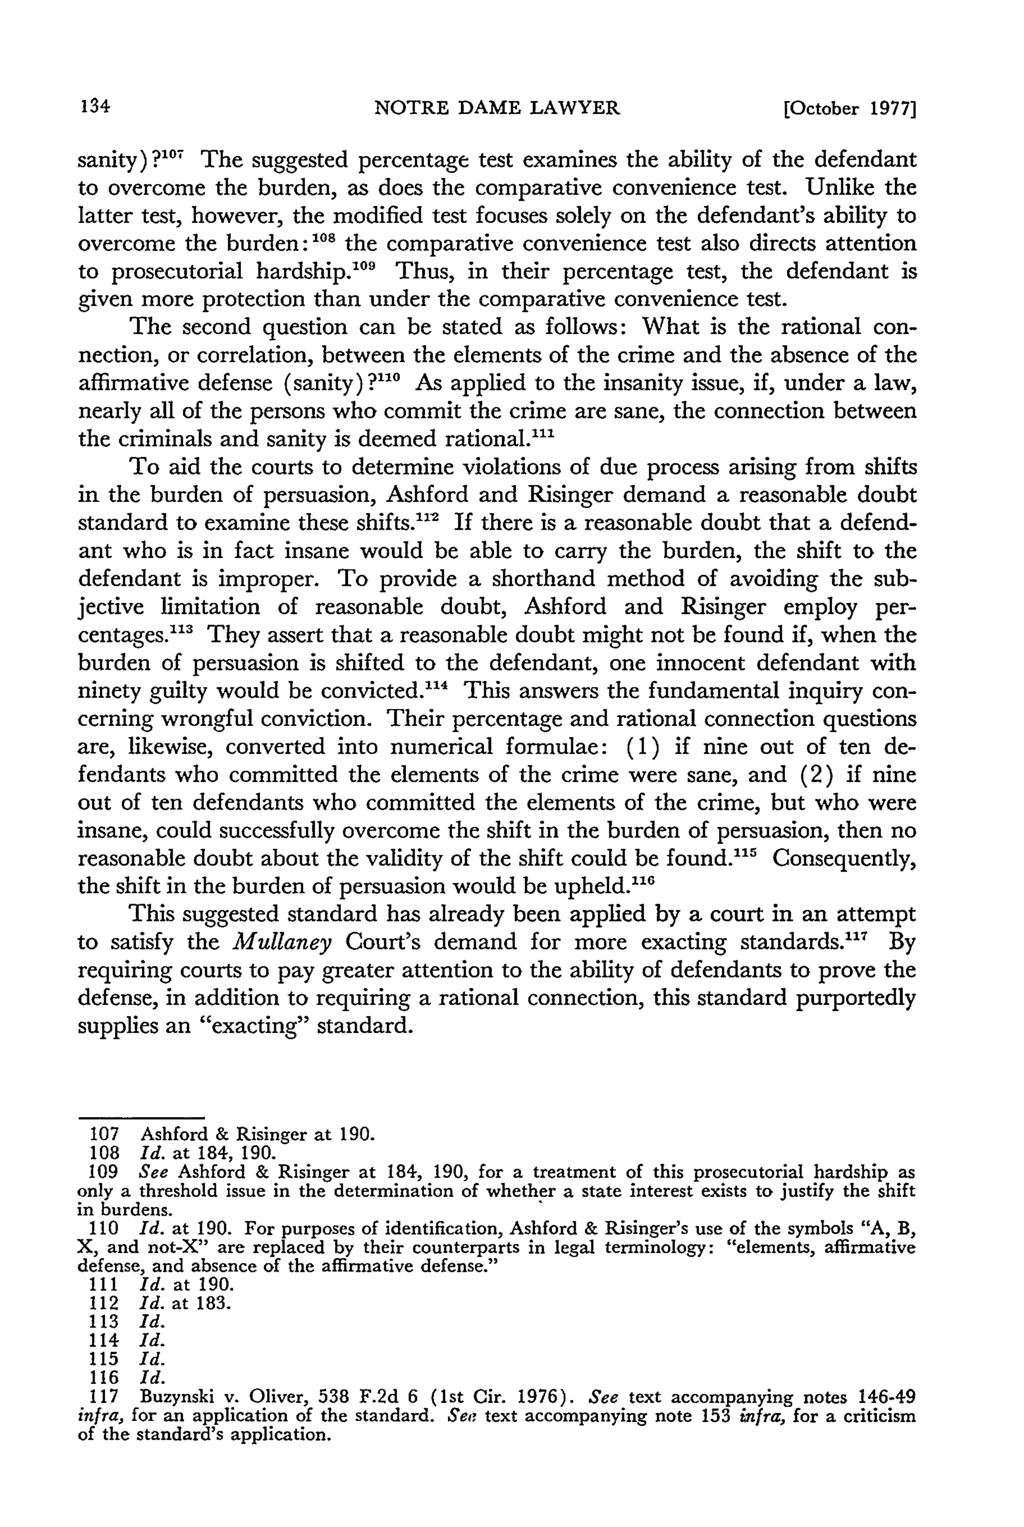 NOTRE DAME LAWYER [October 1977] sanity)?117 The suggested percentage test examines the ability of the defendant to overcome the burden, as does the comparative convenience test.